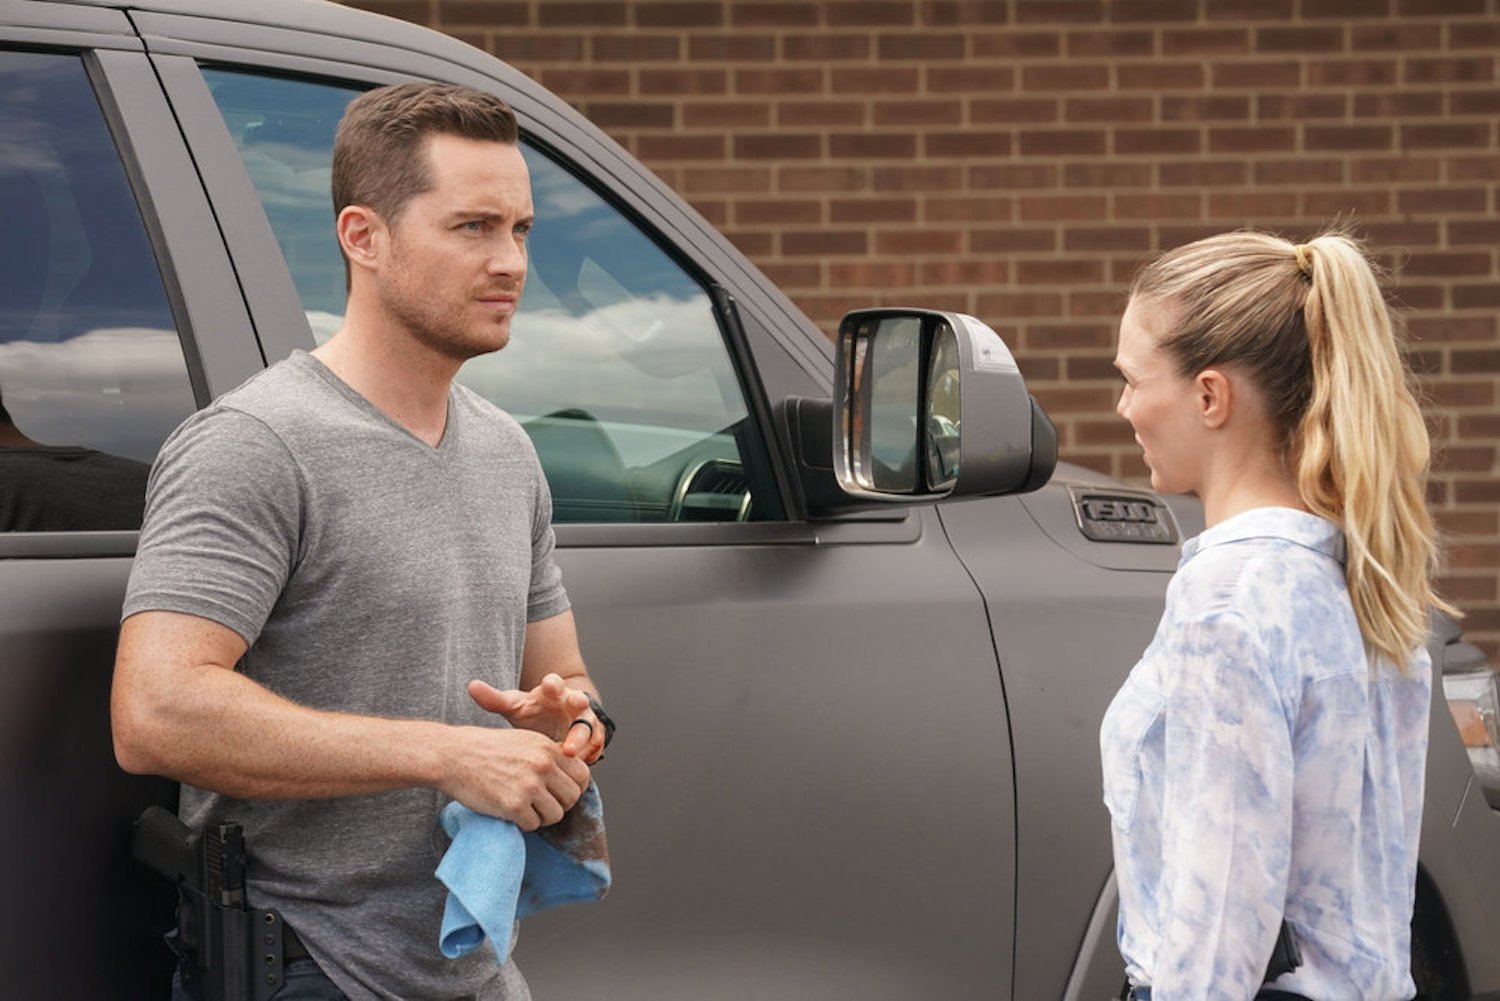 Jay Halstead and Hailey Upton speaking in 'Chicago PD'